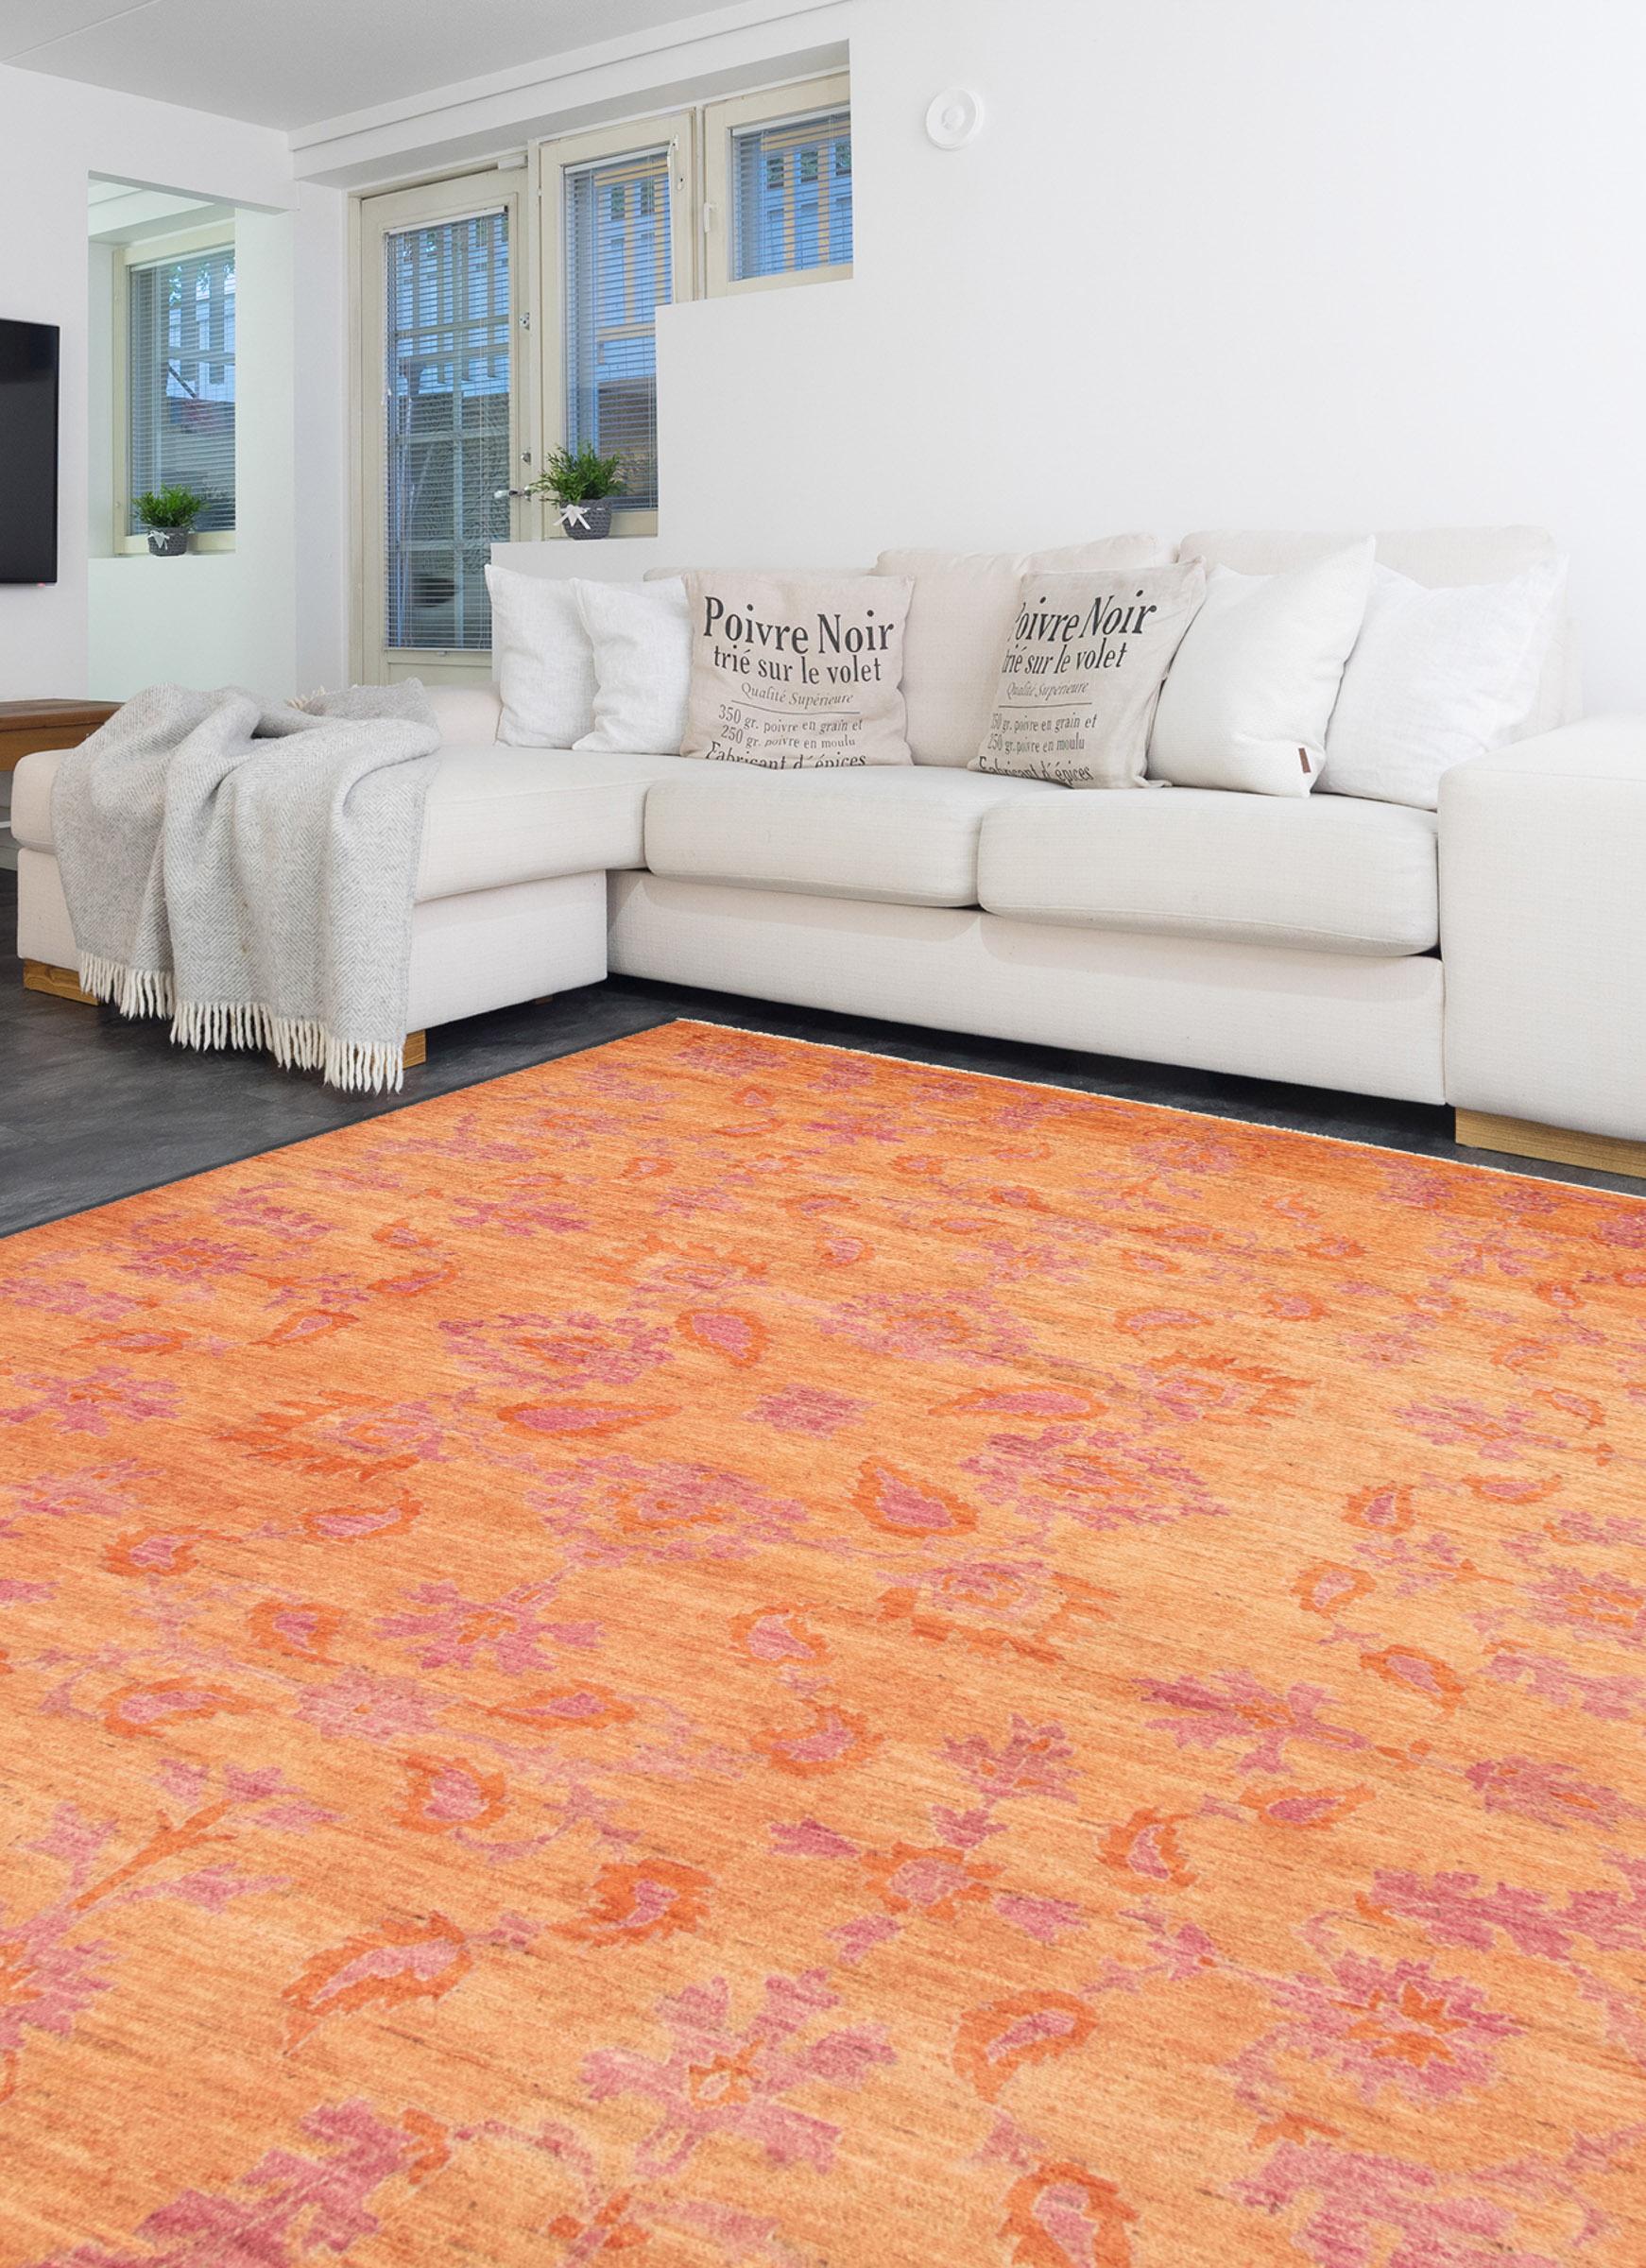 Detailed by bright and inviting shades of pink and orange wool, this hand-knotted carpet measures 10'3